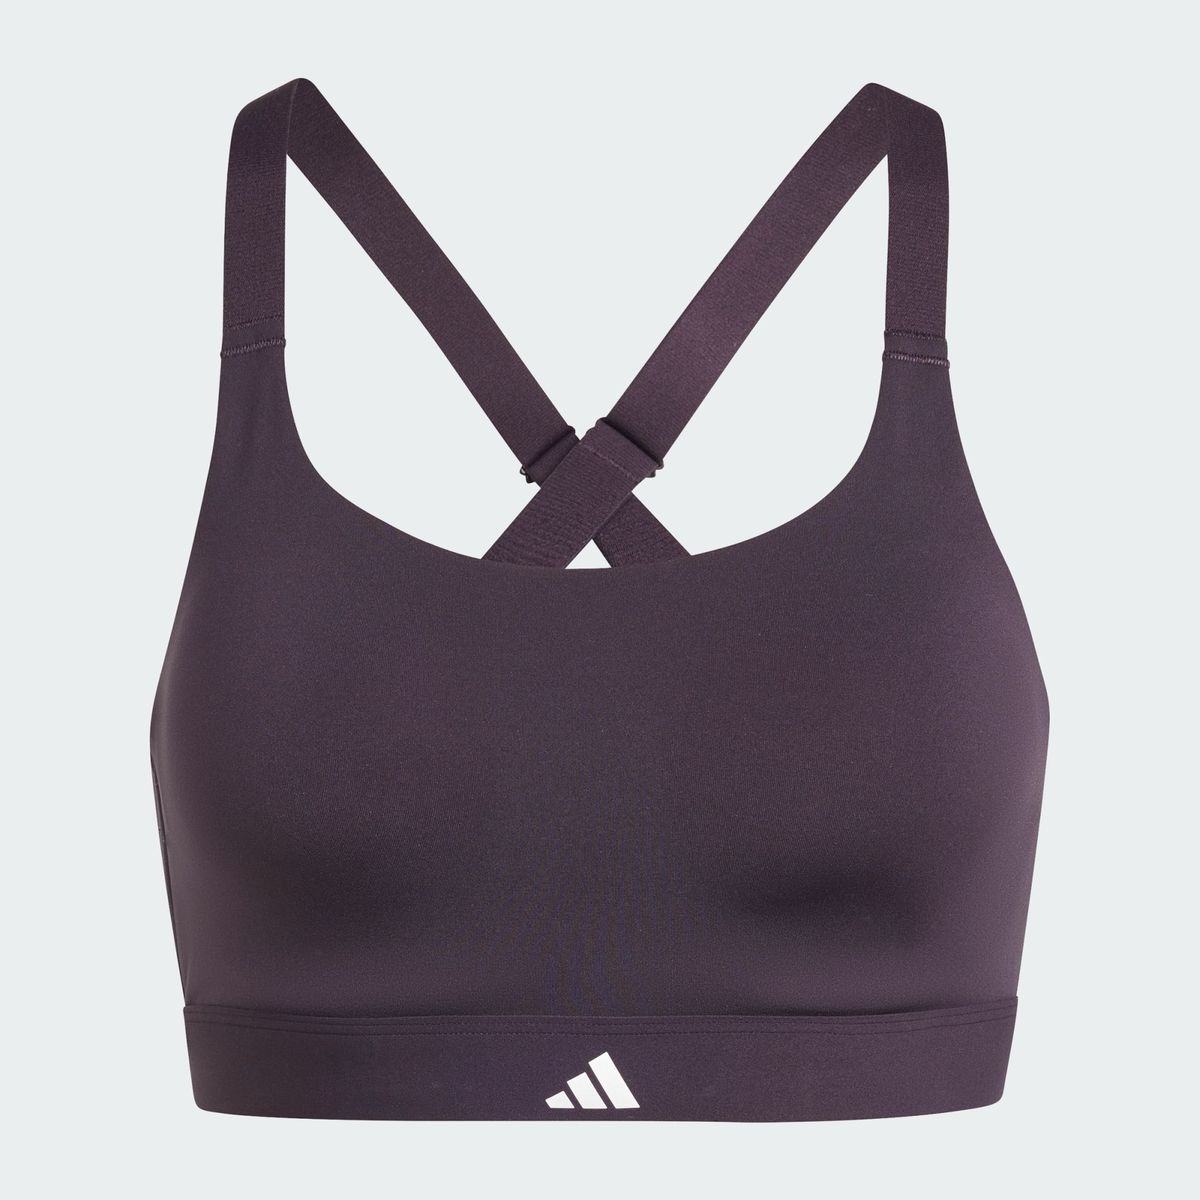 Brassière de training tlrd impact luxe maintien fort Adidas